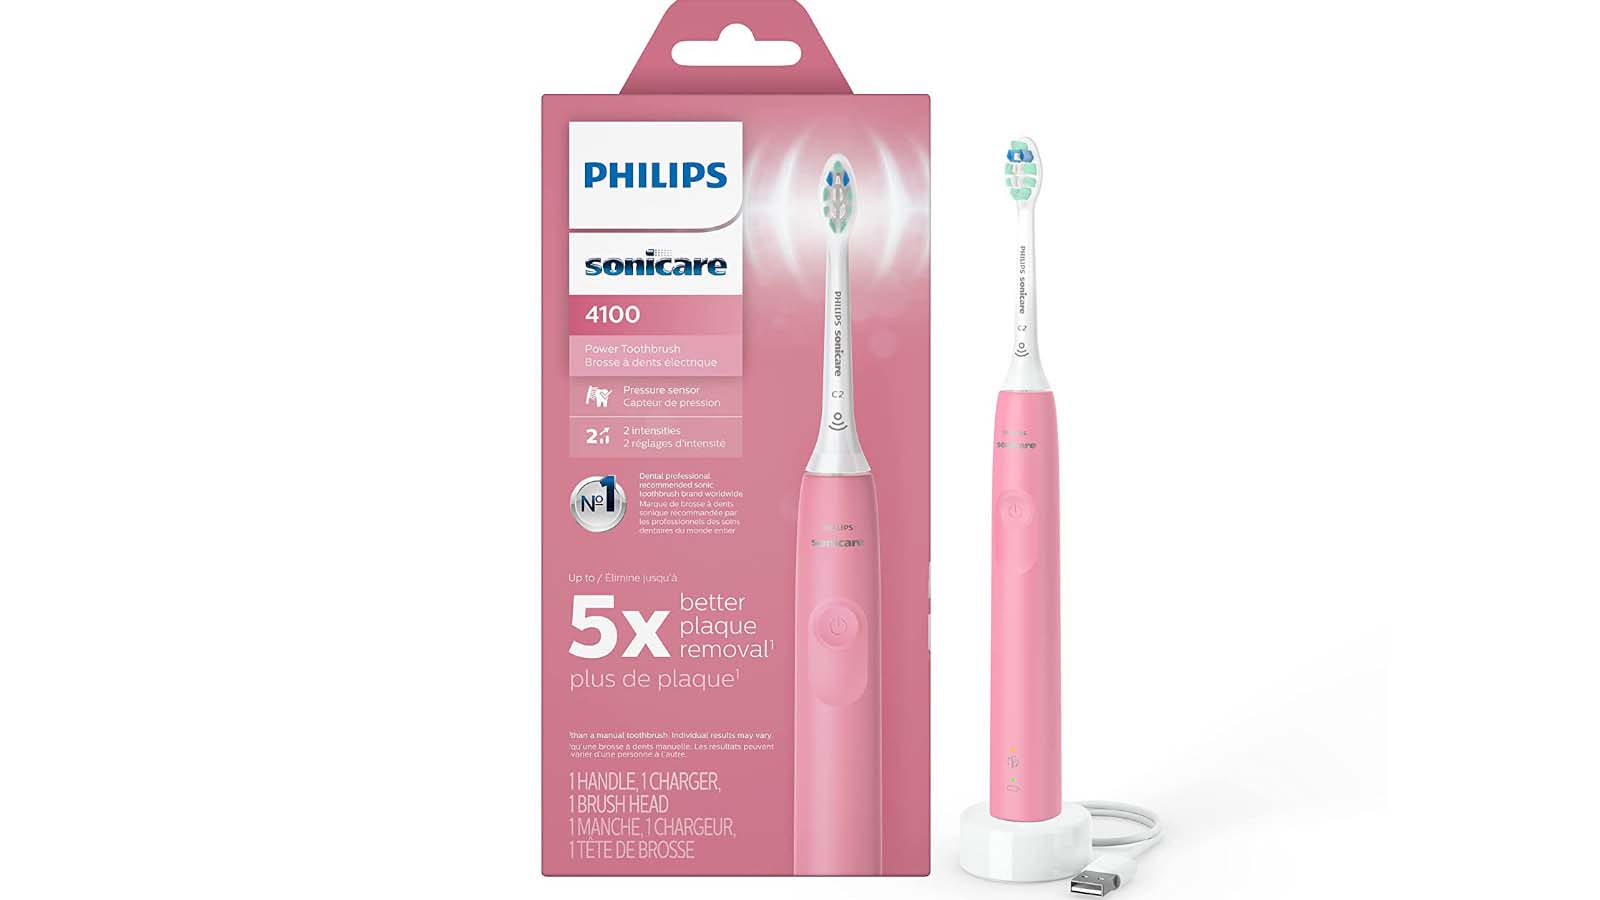 Philips Sonicare ProtectiveClean 4100 (Deep Pink, HX3681/26) toothbrush and its packaging